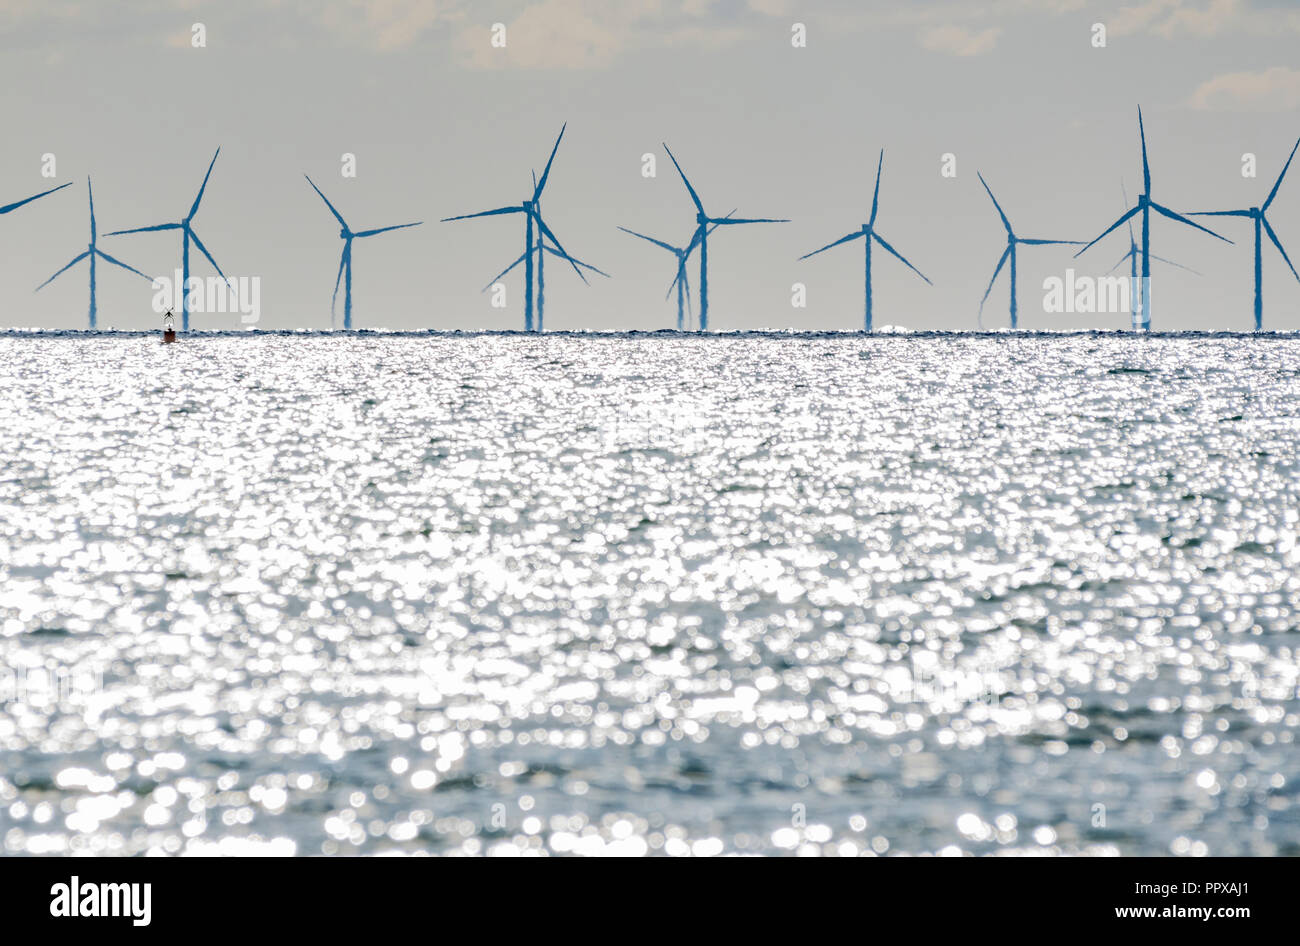 Rampion Offshore Wind Farm turbines in the sea off the South Coast of England, UK. Renewable green energy. Global warming. Eco friendly energy. Stock Photo